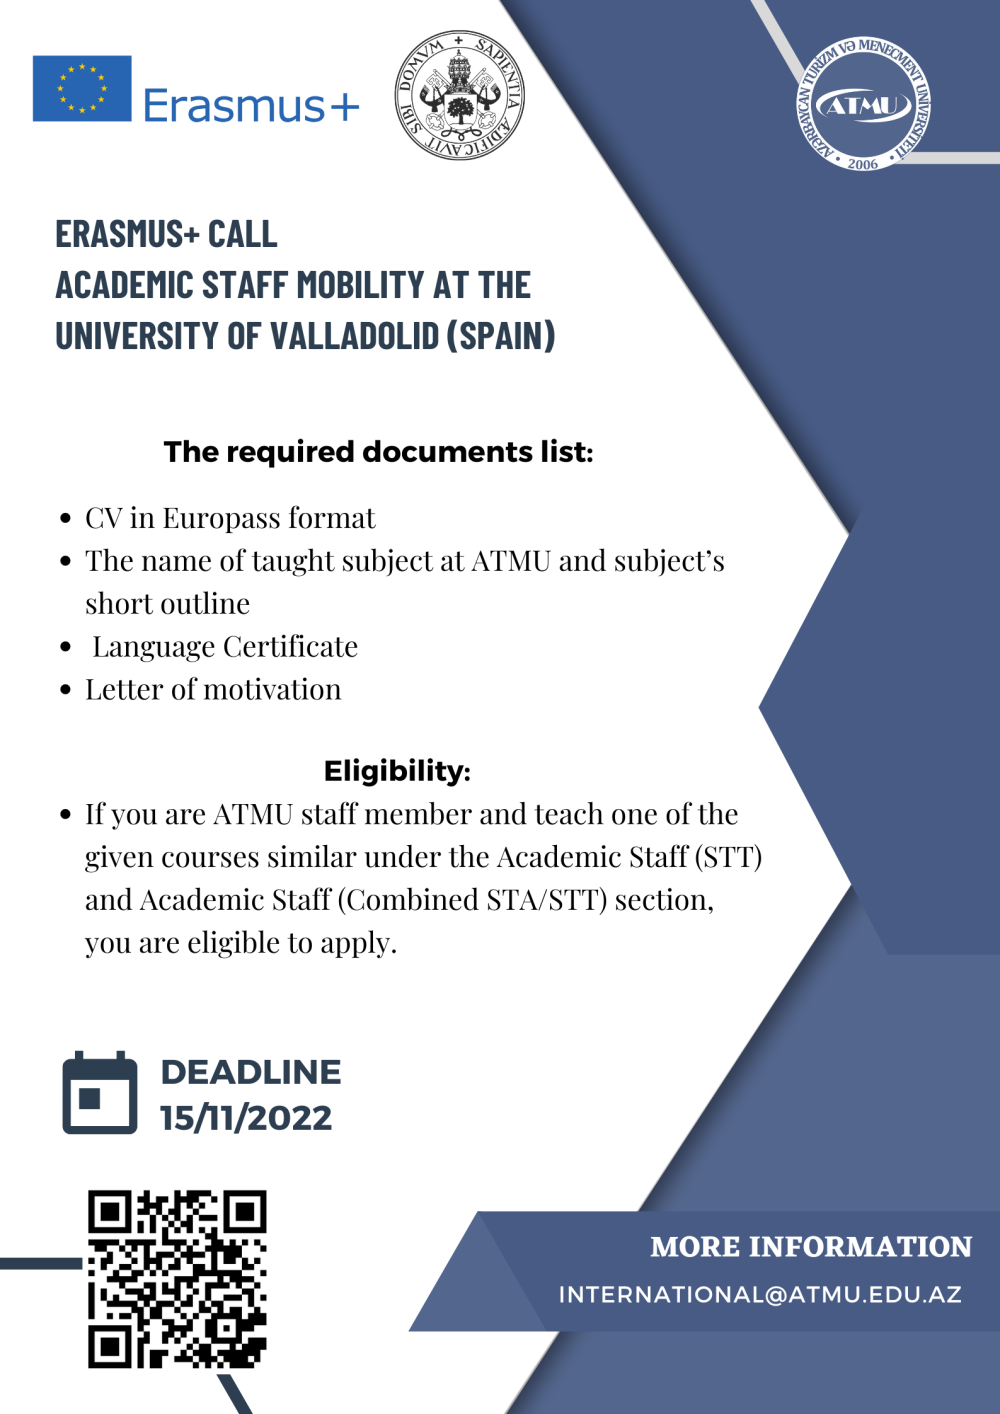 Call for Erasmus+ Academic Staff Mobility at the University of Valladolid 